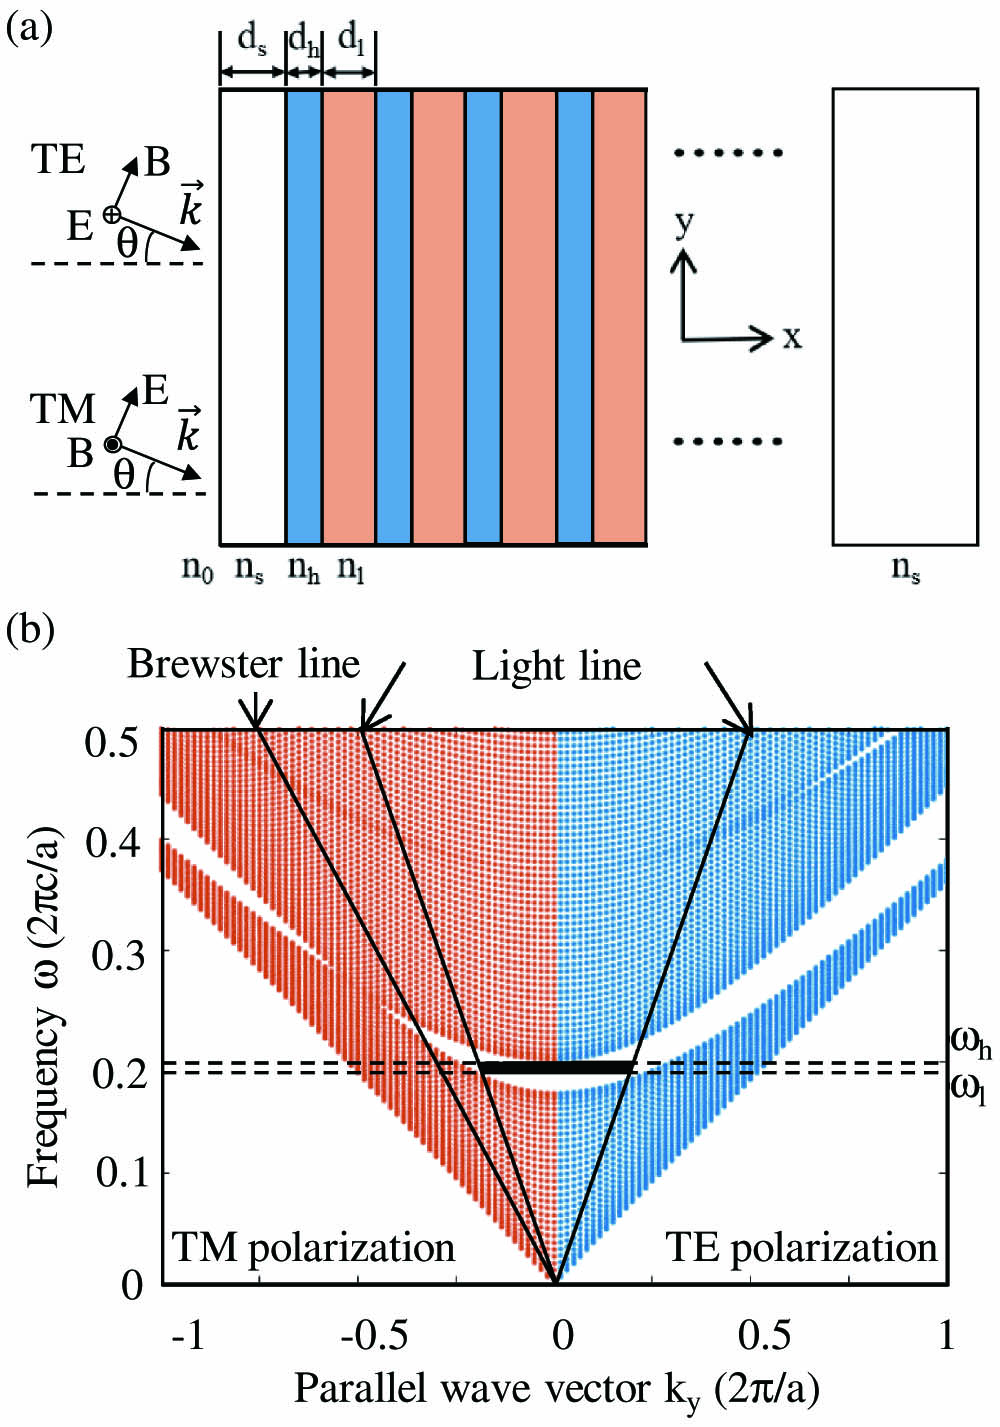 Structure model and photonic bandgap. (a) Schematic of flexible reflective film; (b) photonic bandgap diagram for a one-dimensional photonic crystal.